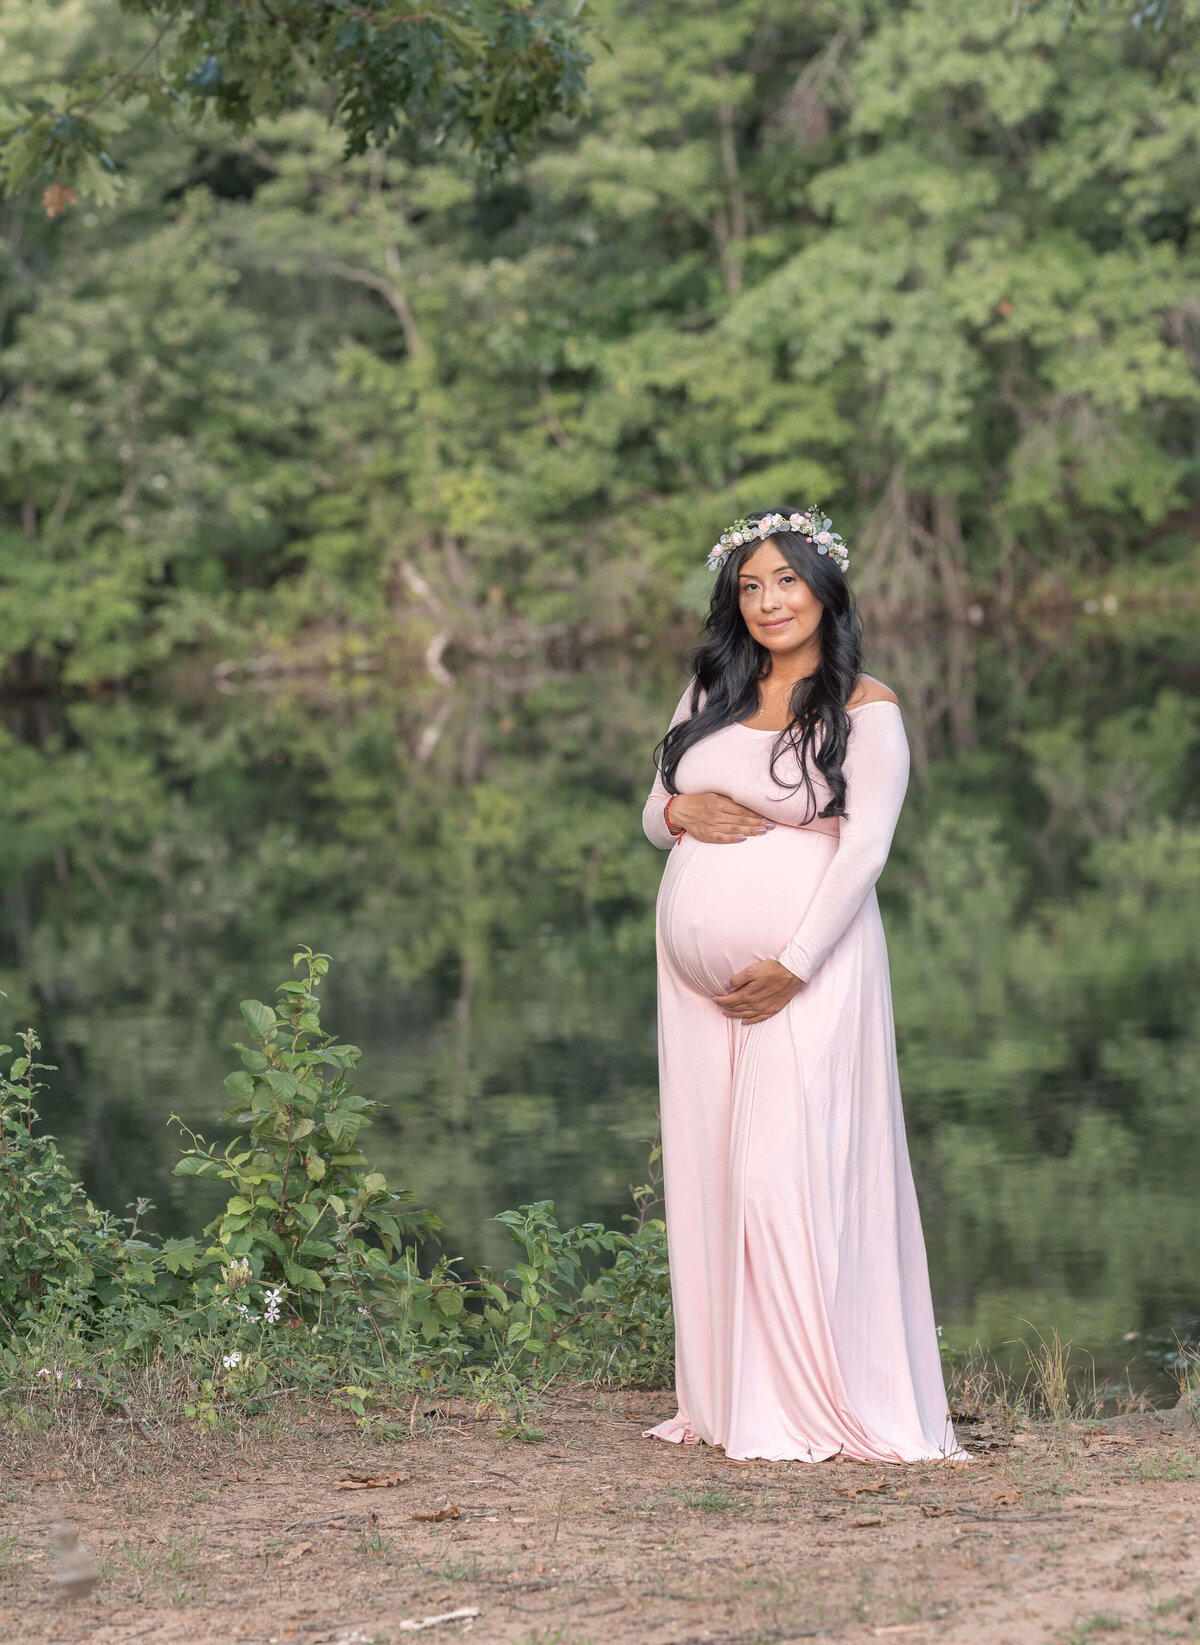 maternity by the lake, wearing pink maternity dress and a flower crown